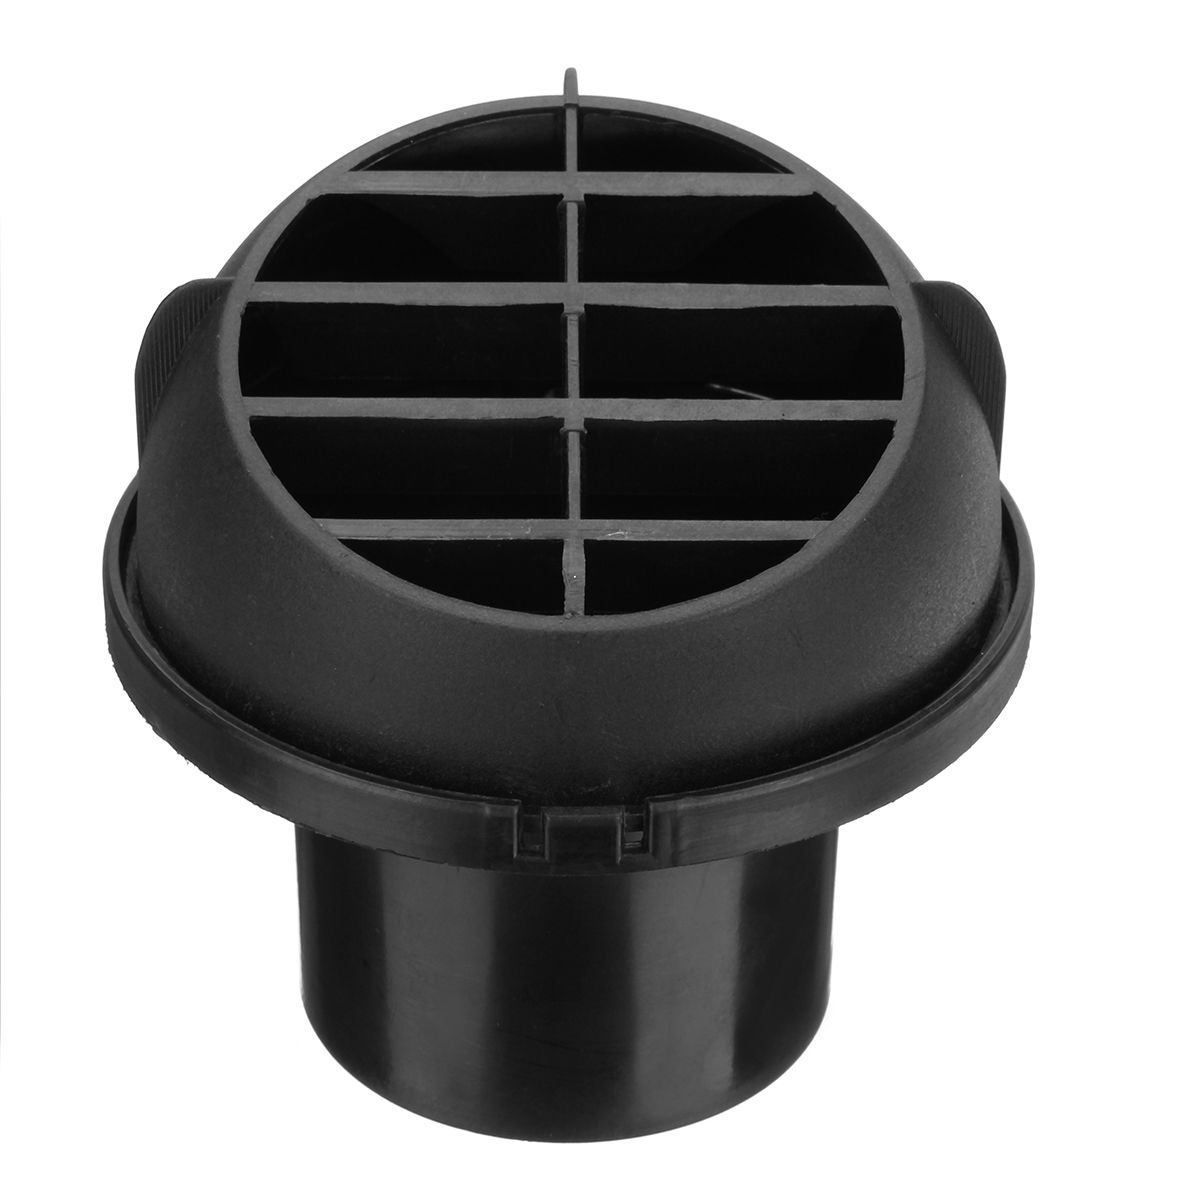 60mm-Warm-Heater-Parking-Heater-Car-Heater-Air-Outlet-Directional-Rotatable-1296280